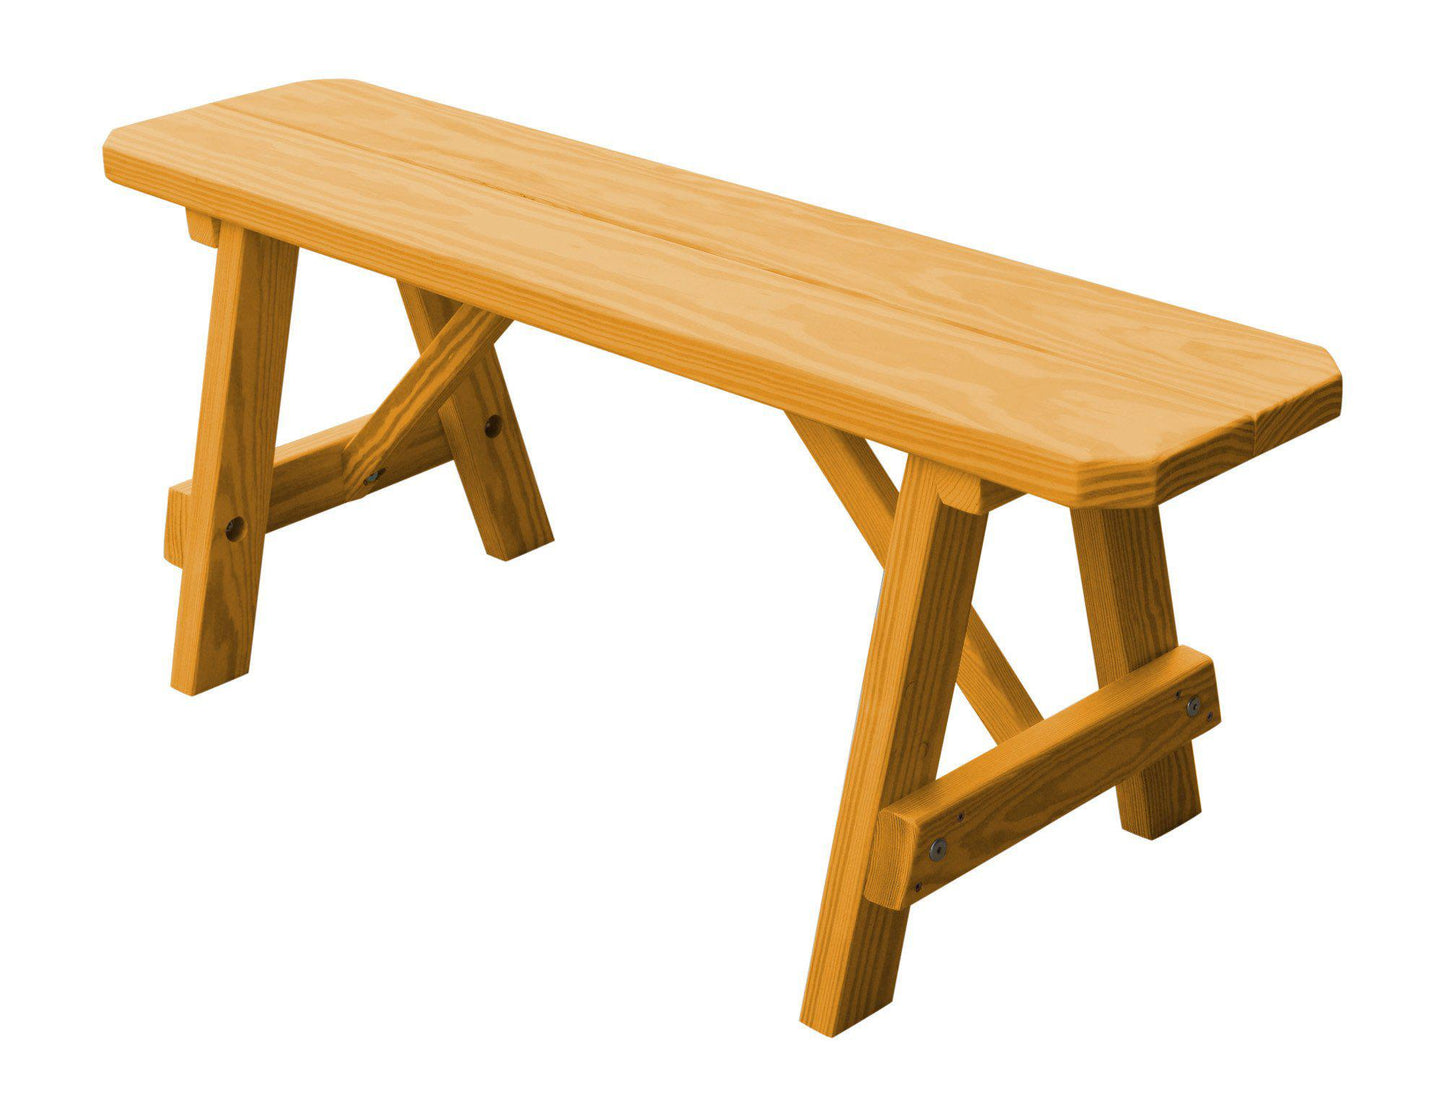 A&L Furniture Co. Pressure Treated Pine 44" Traditional Bench Only - LEAD TIME TO SHIP 10 BUSINESS DAYS